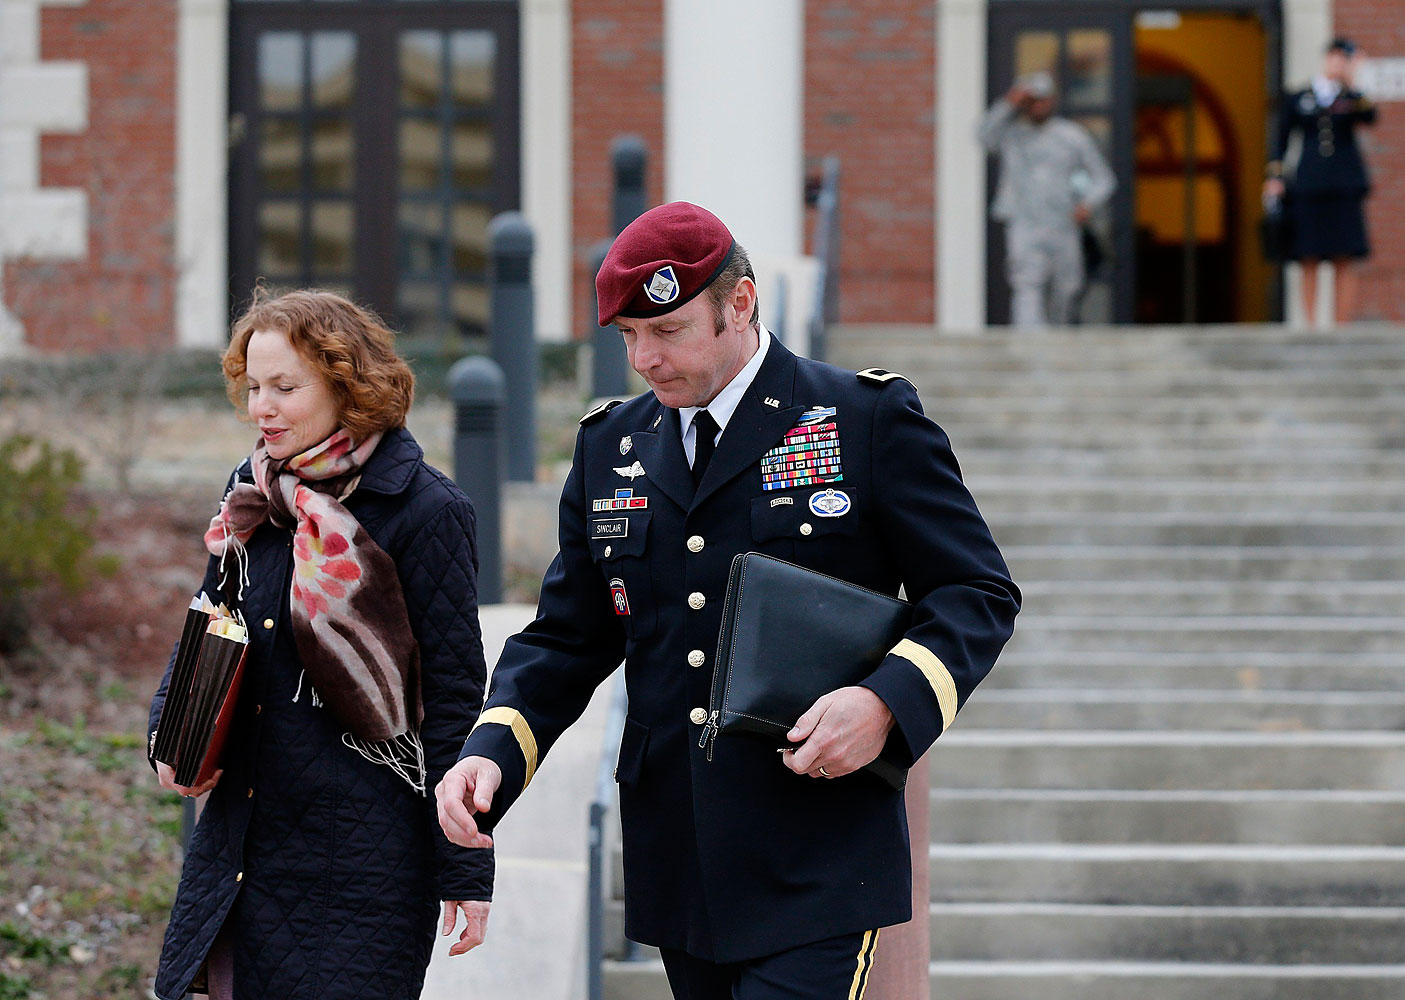 Army Brigadier General Jeffrey Sinclair leaves the courthouse with one of his attorneys at Fort Bragg in Fayetteville, N.C., on March 4, 2014.